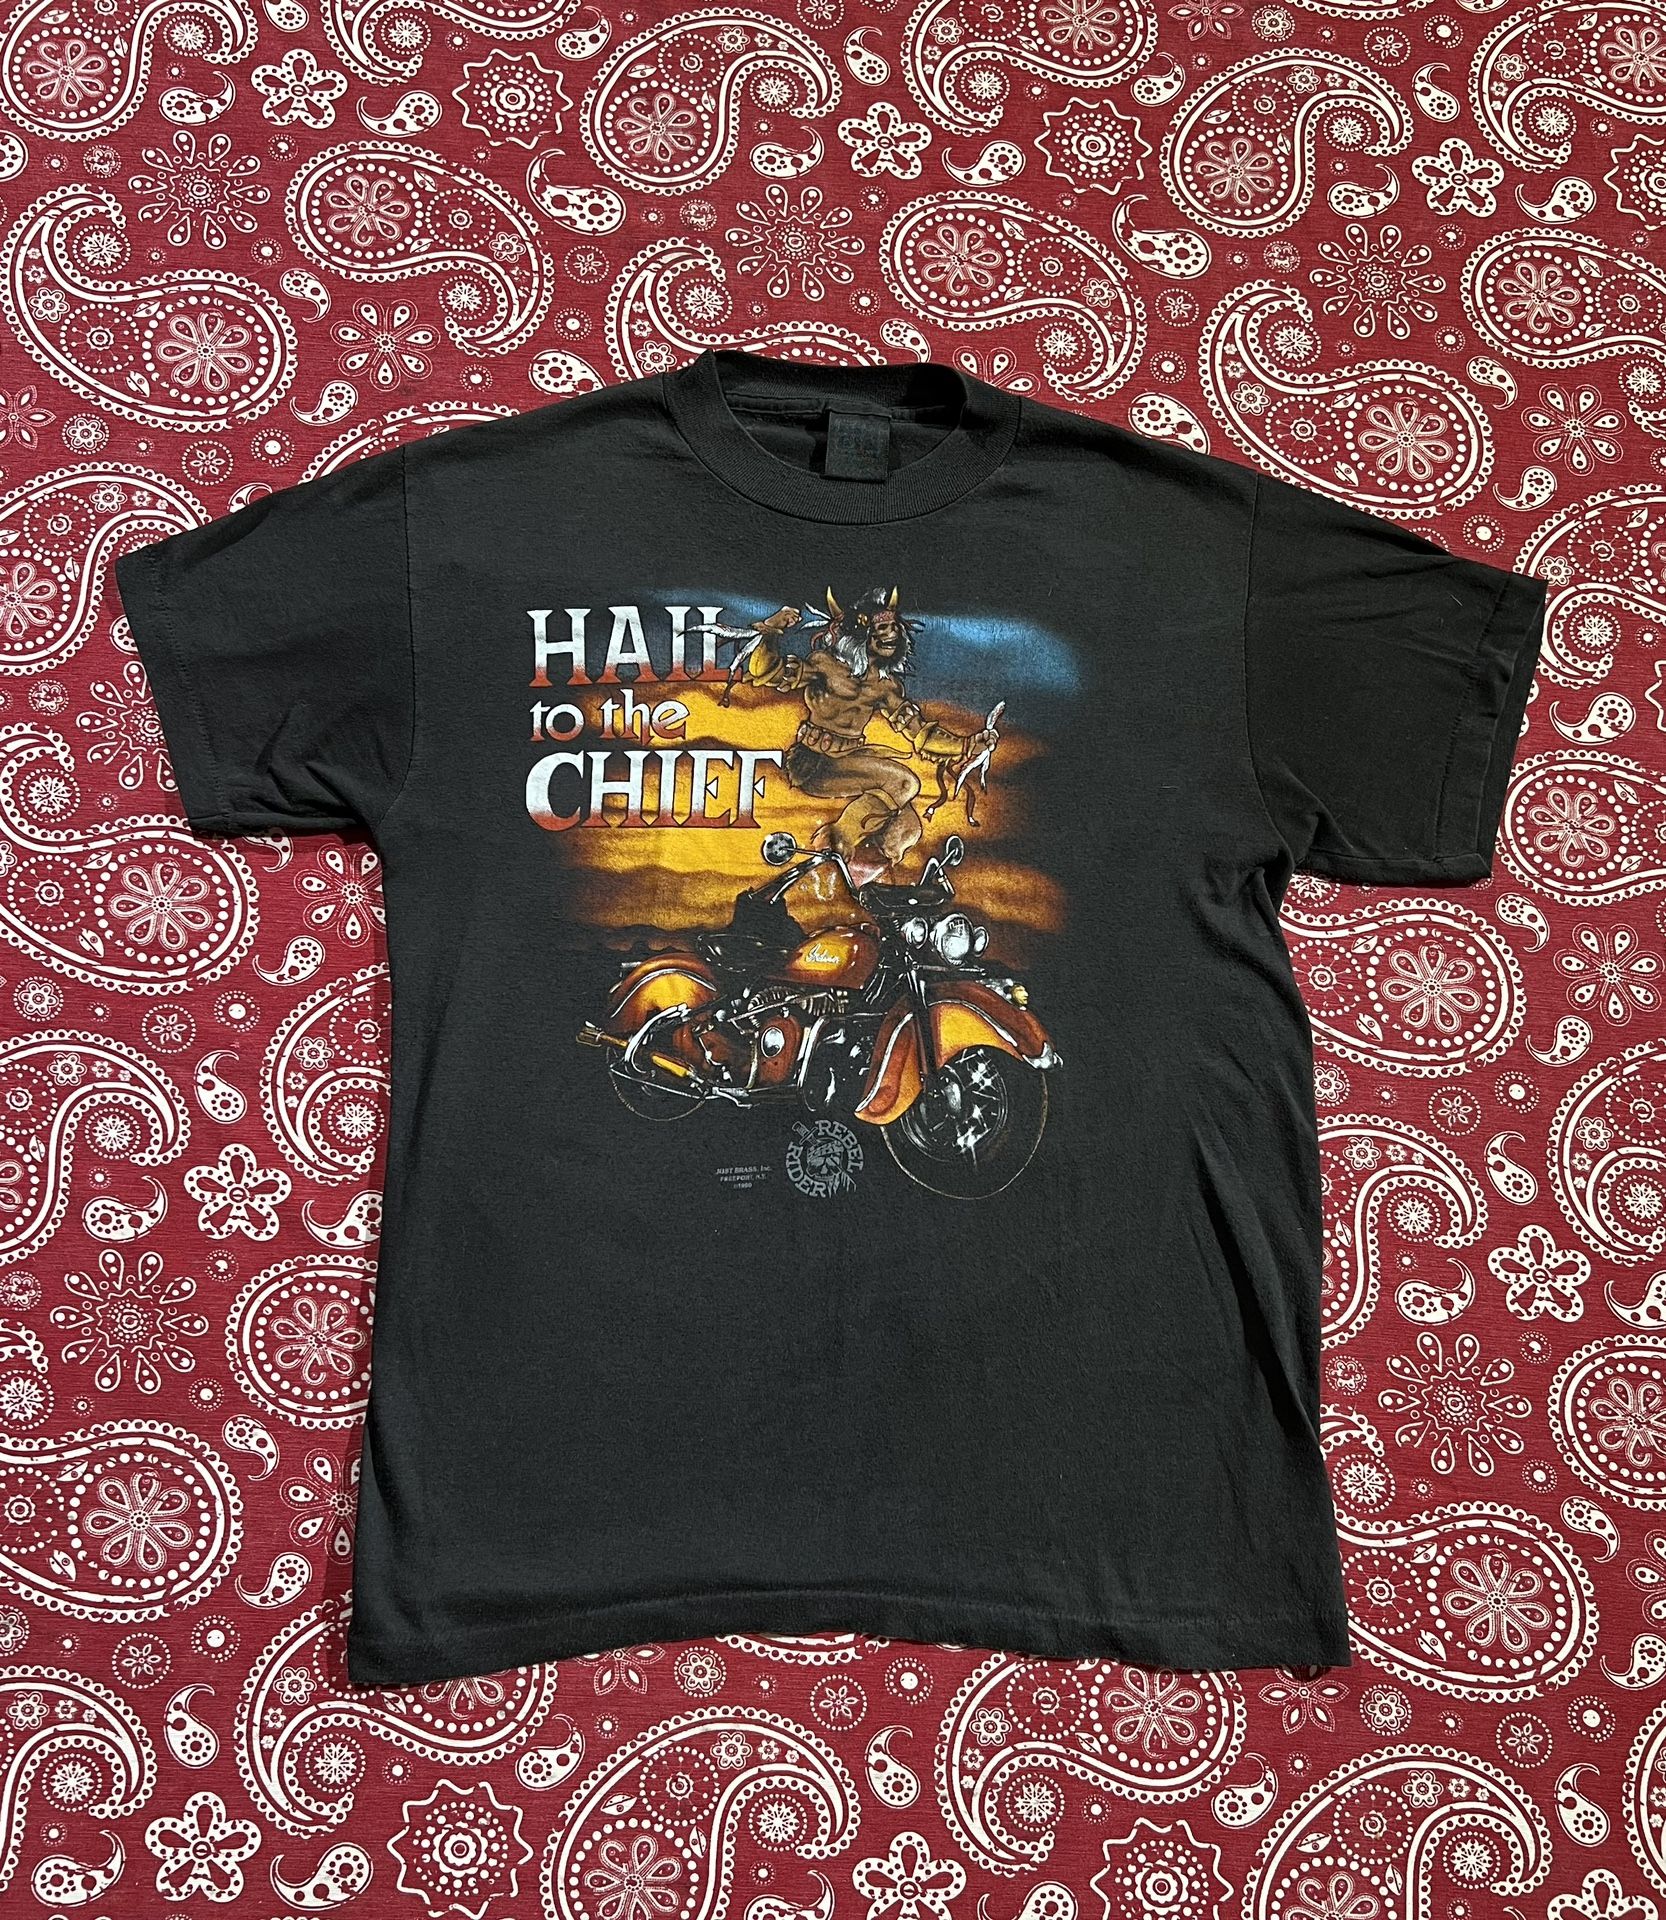 1990 “Hail to the Chief” Indian Motorcycle T-shirt • Fits S (Length: 25’’ / Width: 18’’) • $50 {No Flaws}